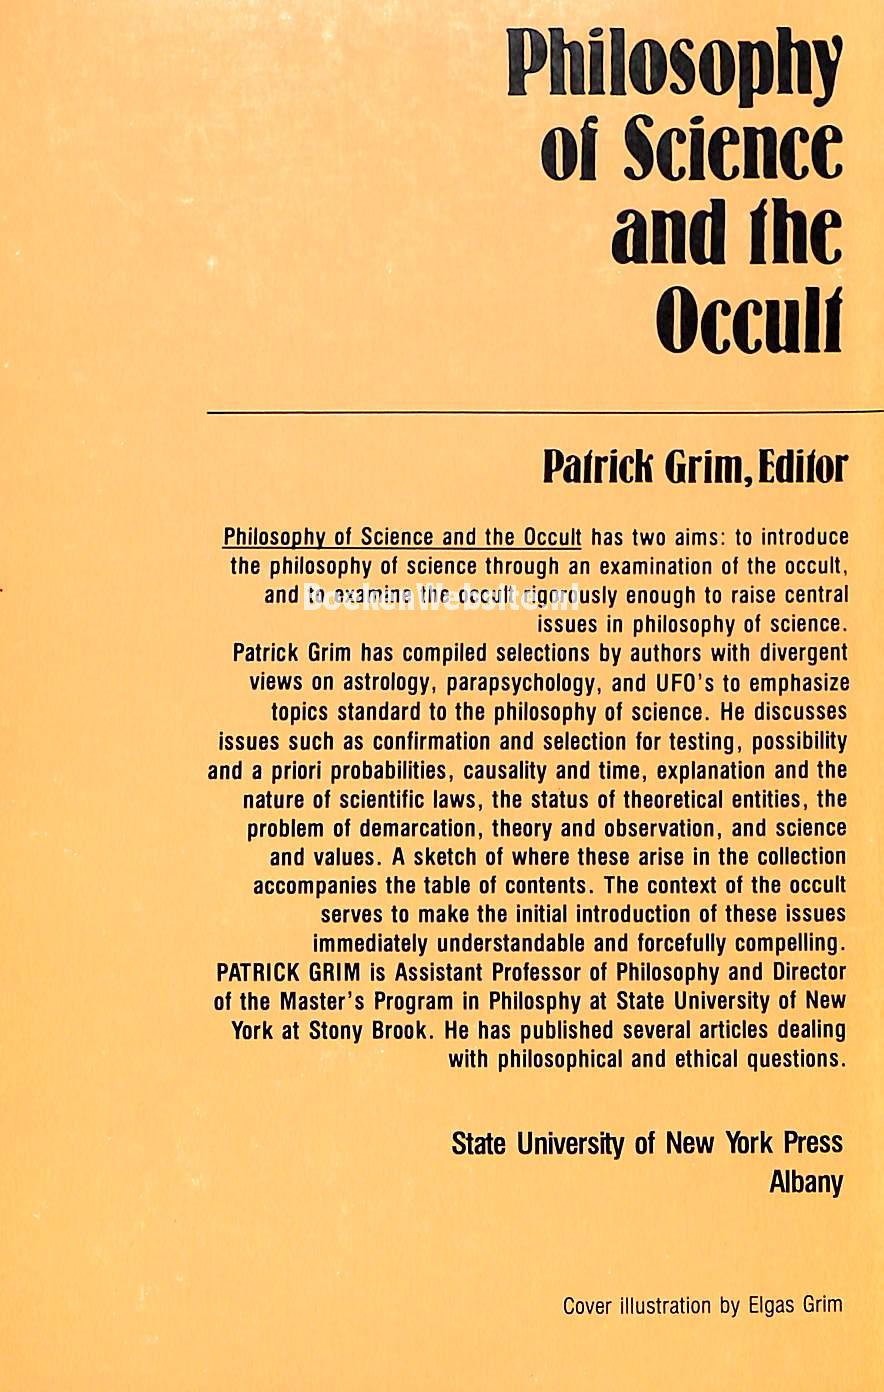 Philosophy of Science and the Occult